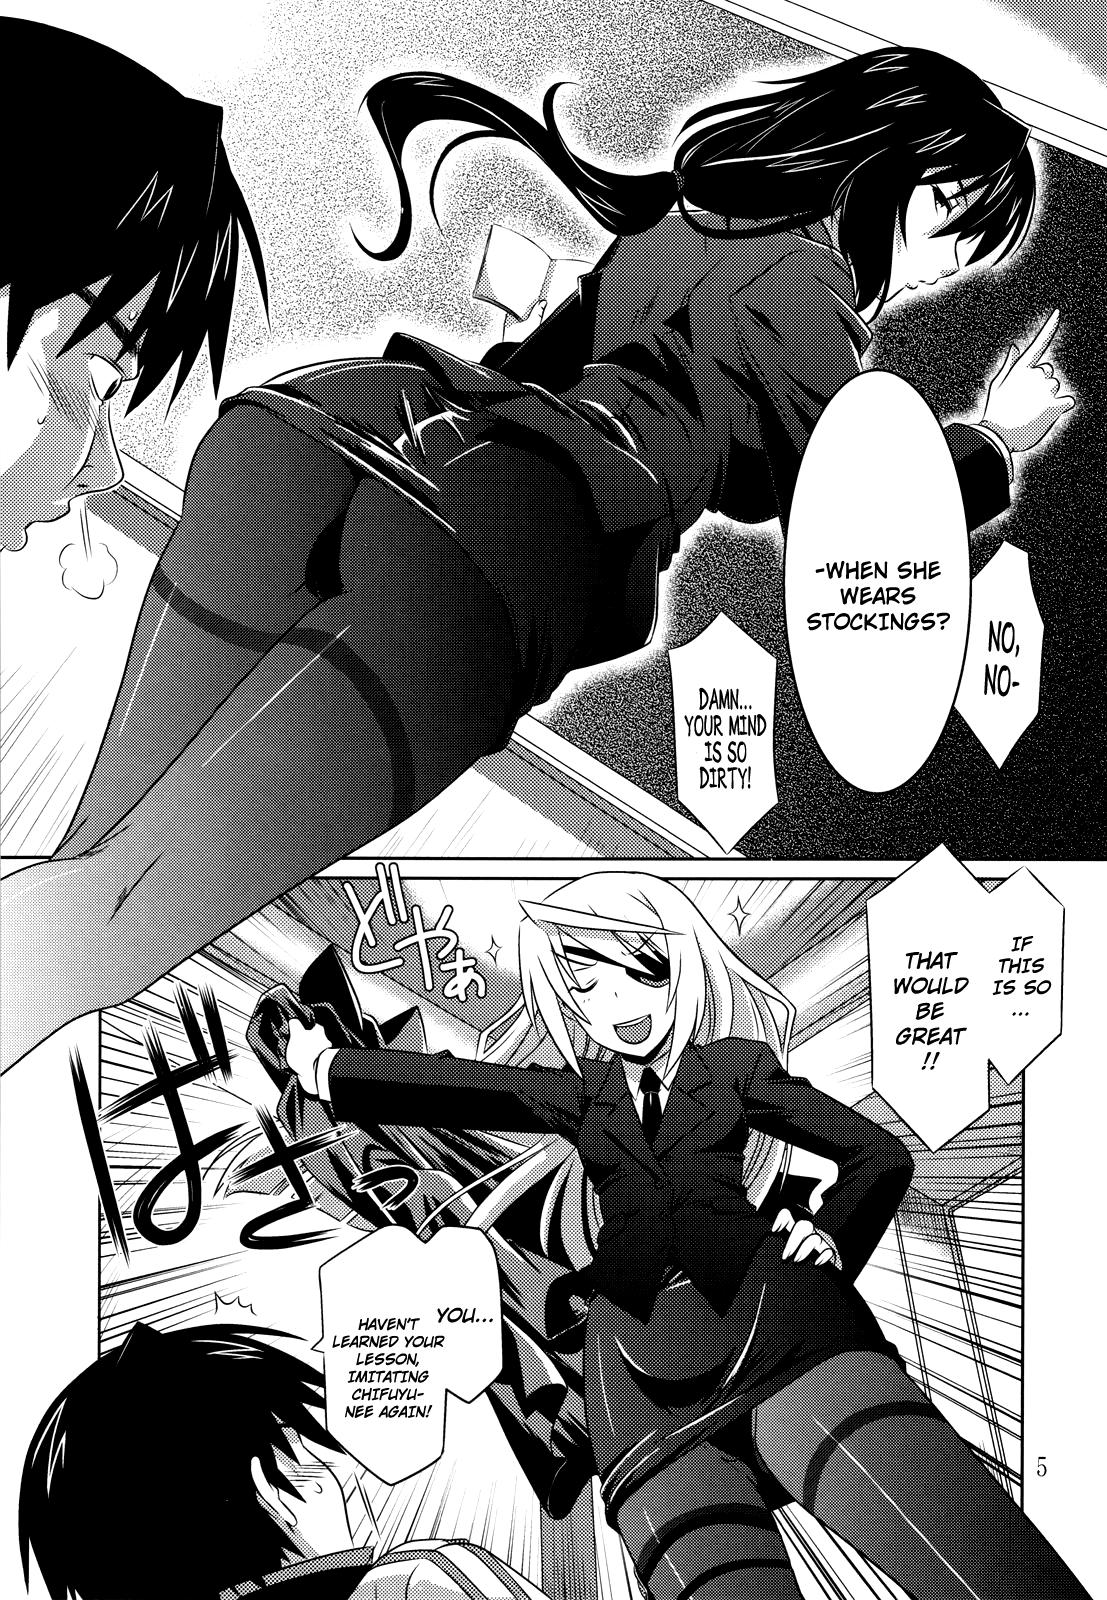 Arab is Incest Strategy 2 - Infinite stratos Hot Women Having Sex - Page 4